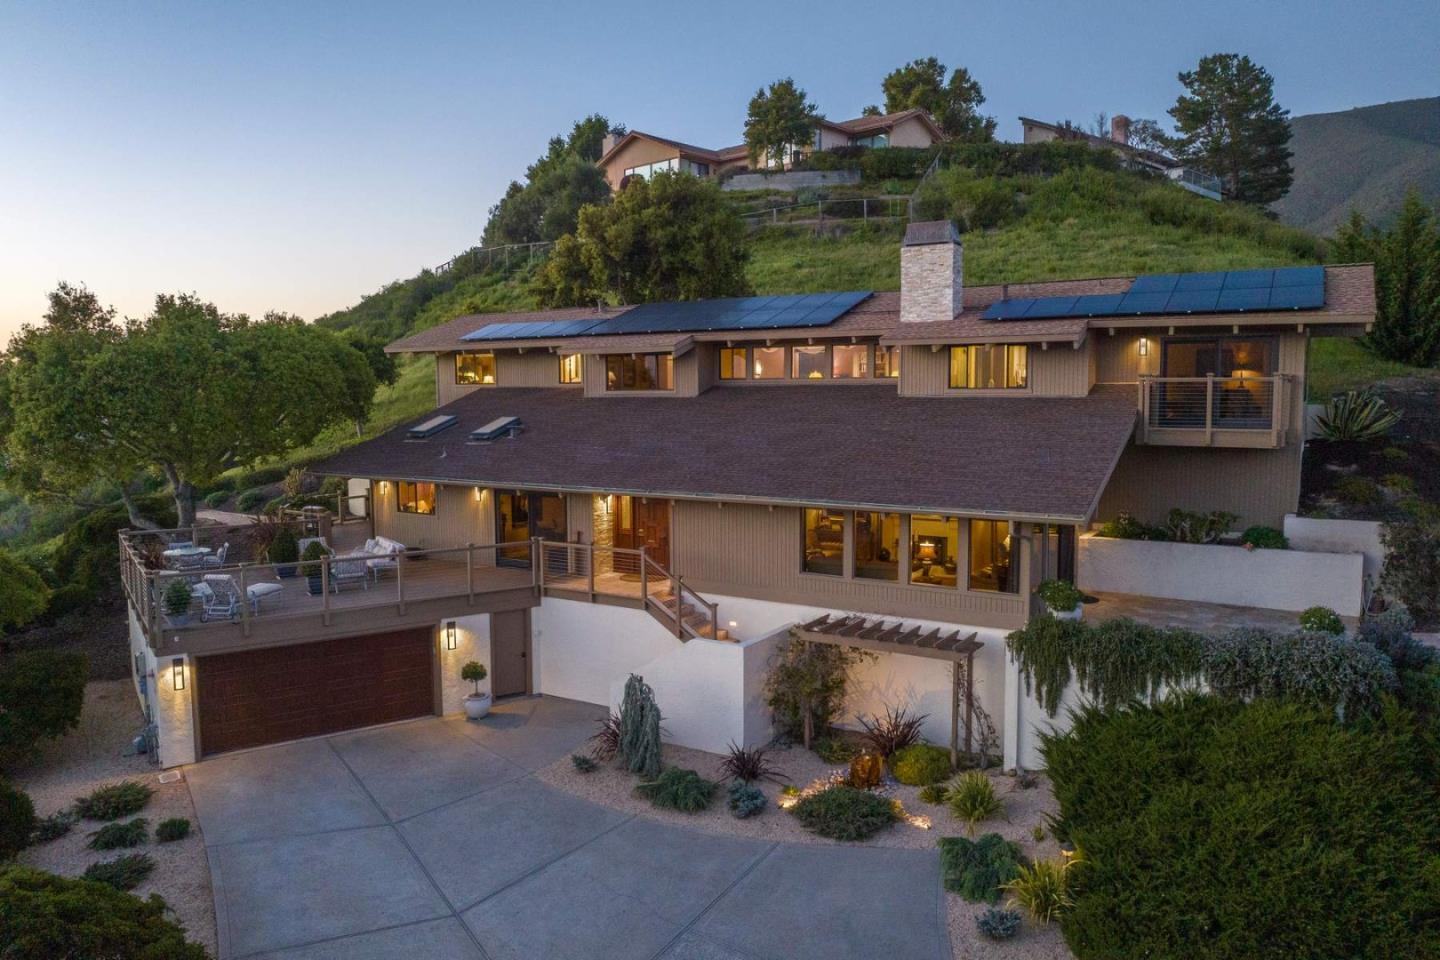 Photo of 13369 Middle Canyon Rd in Carmel Valley, CA